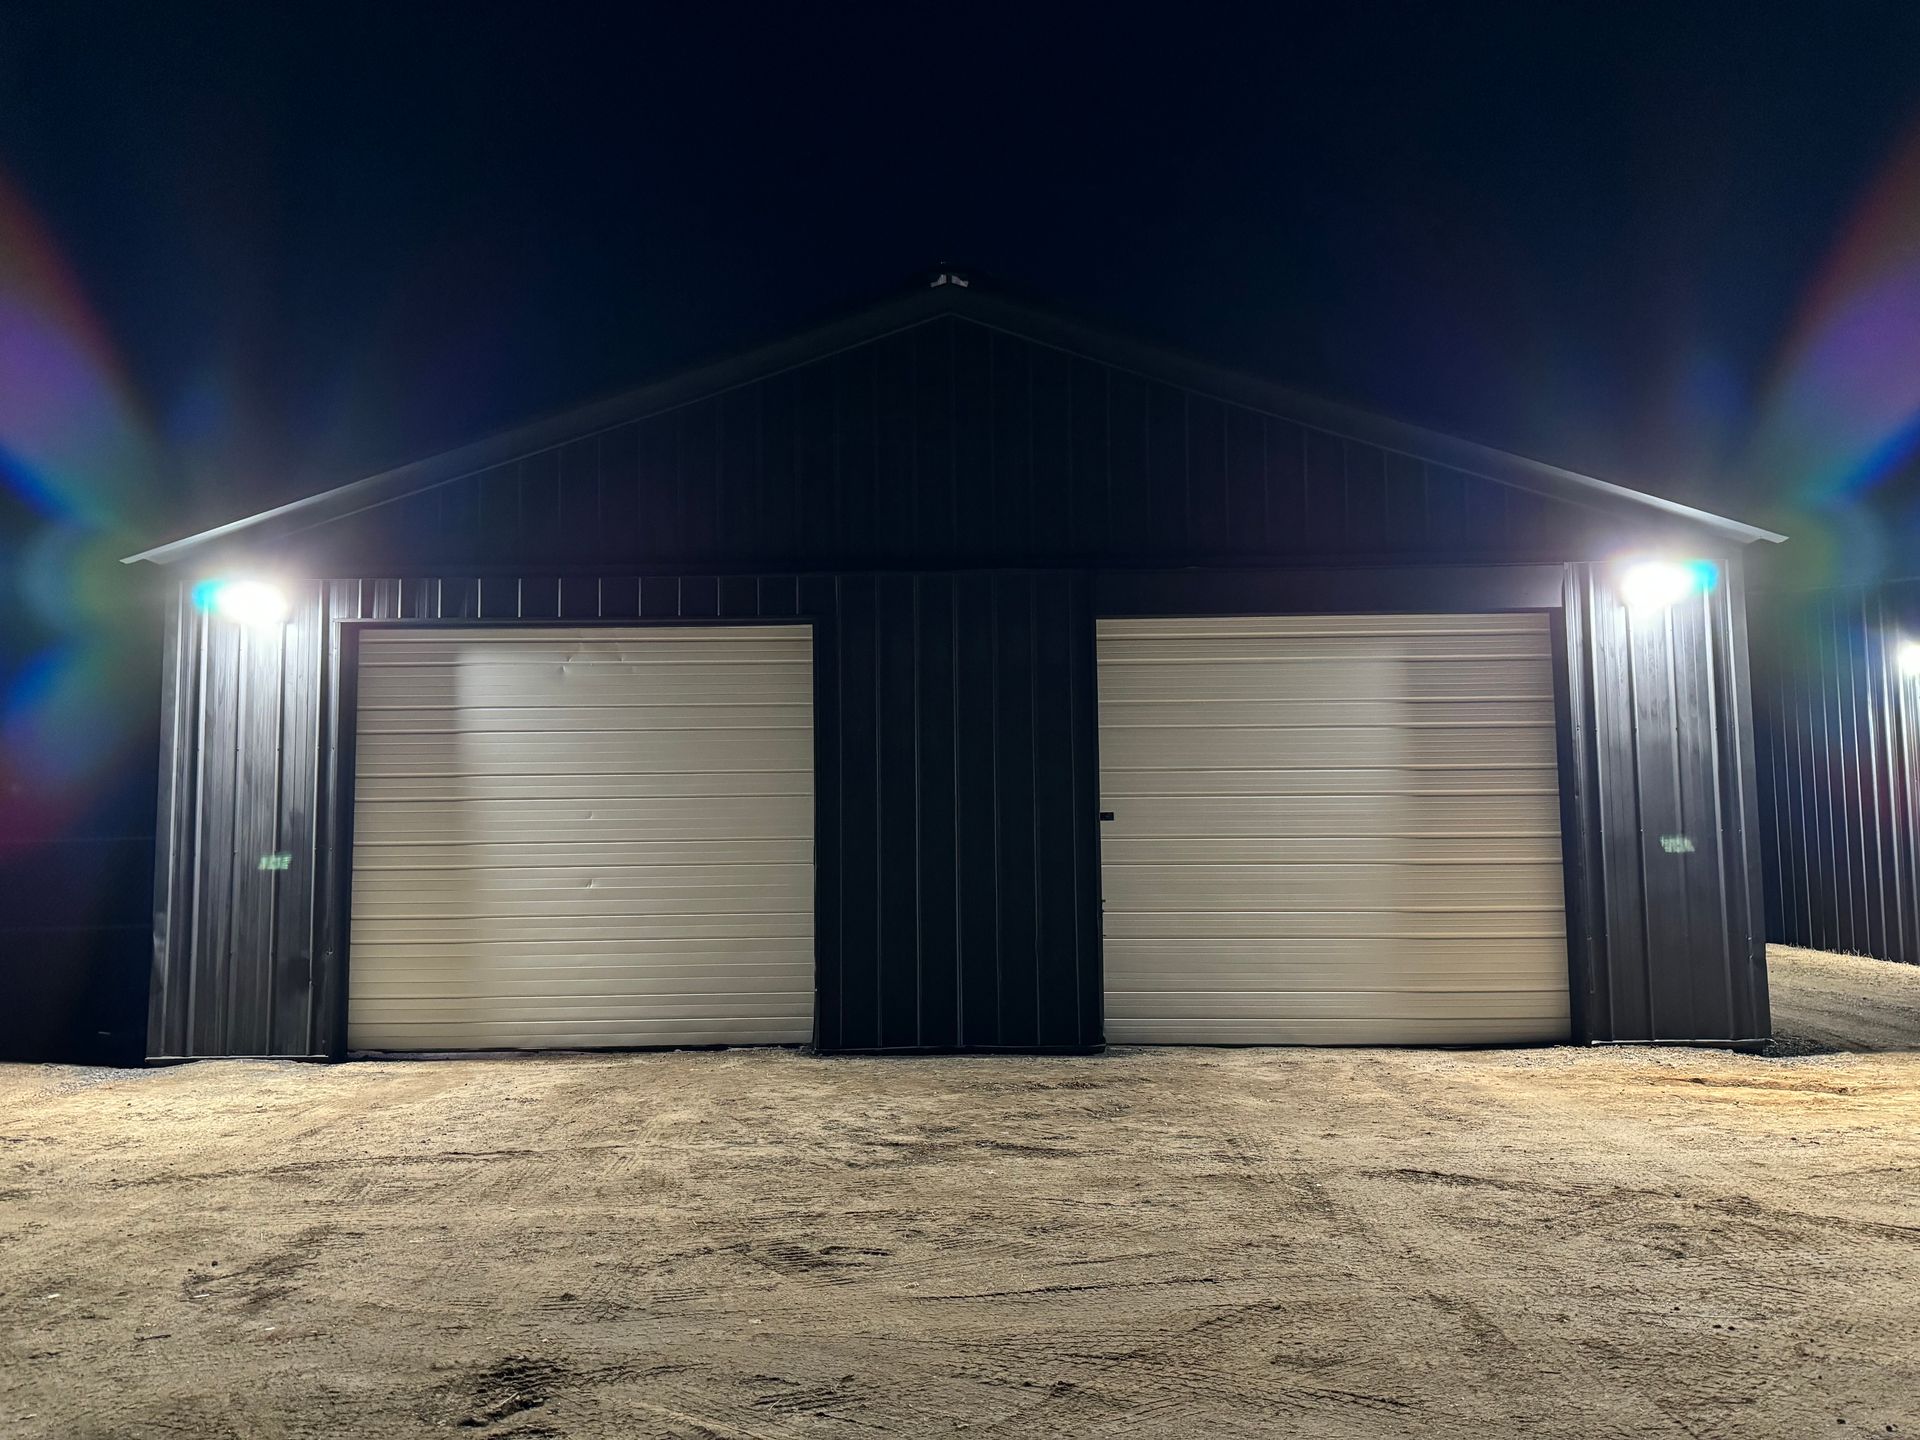 A garage with two garage doors is lit up at night.